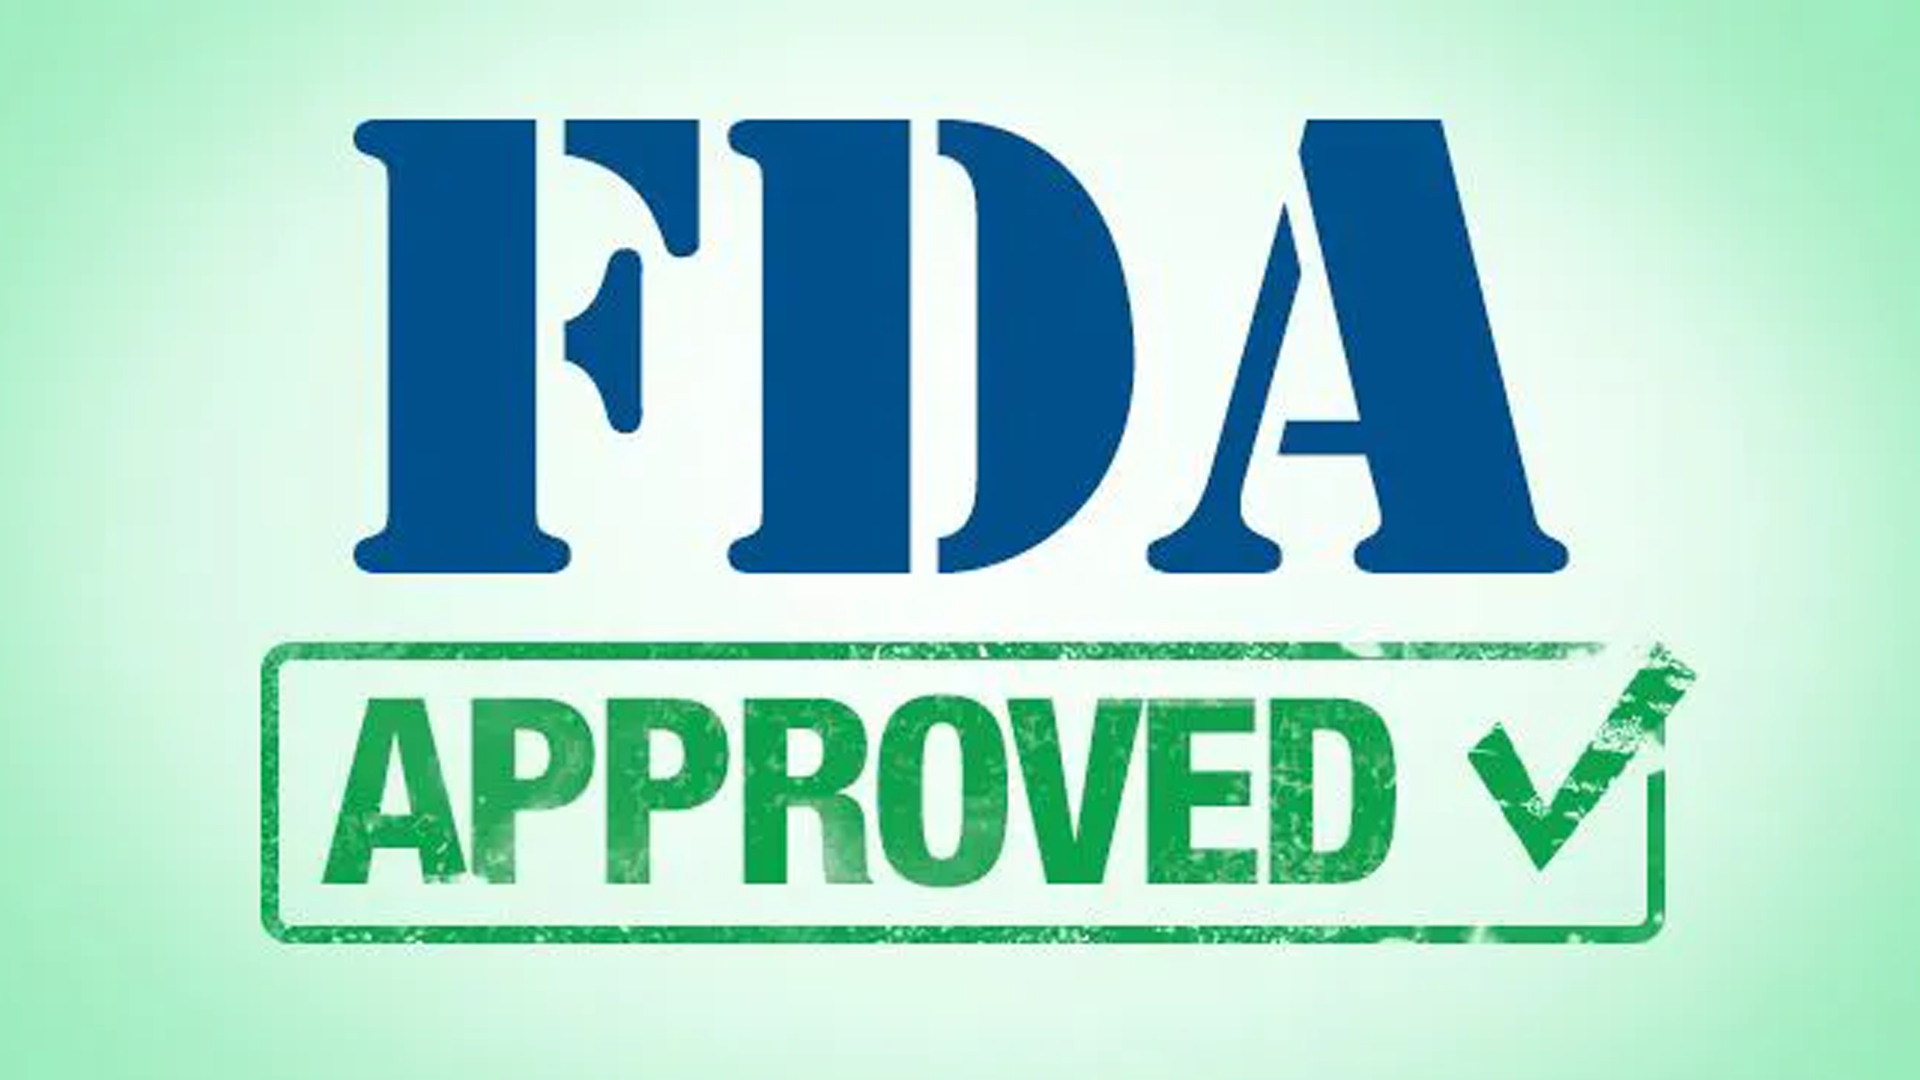 Image of "FDA Approved" in blue and green.